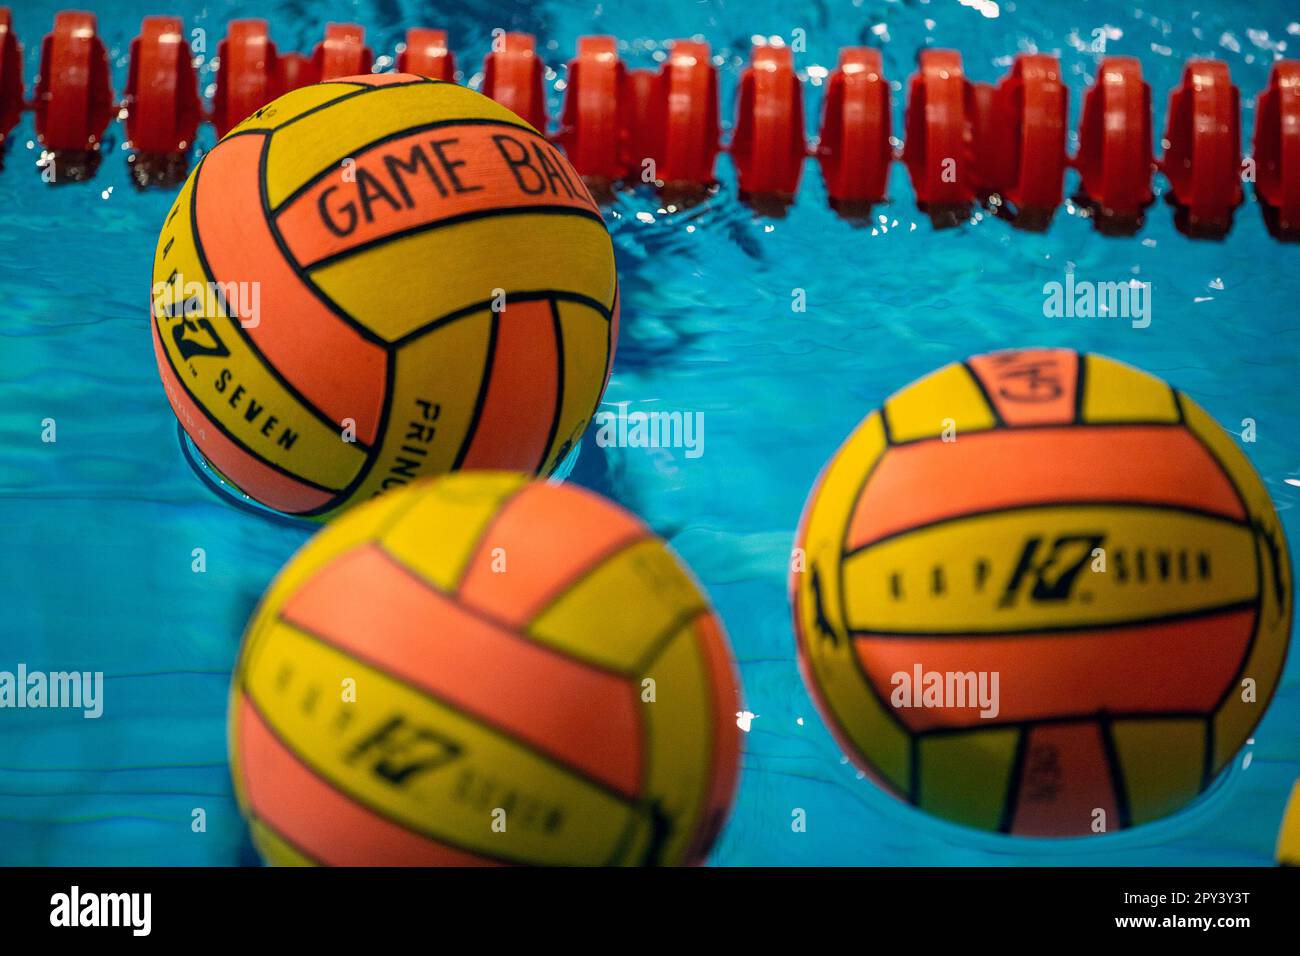 Water polo balls in a pool before a match Stock Photo - Alamy